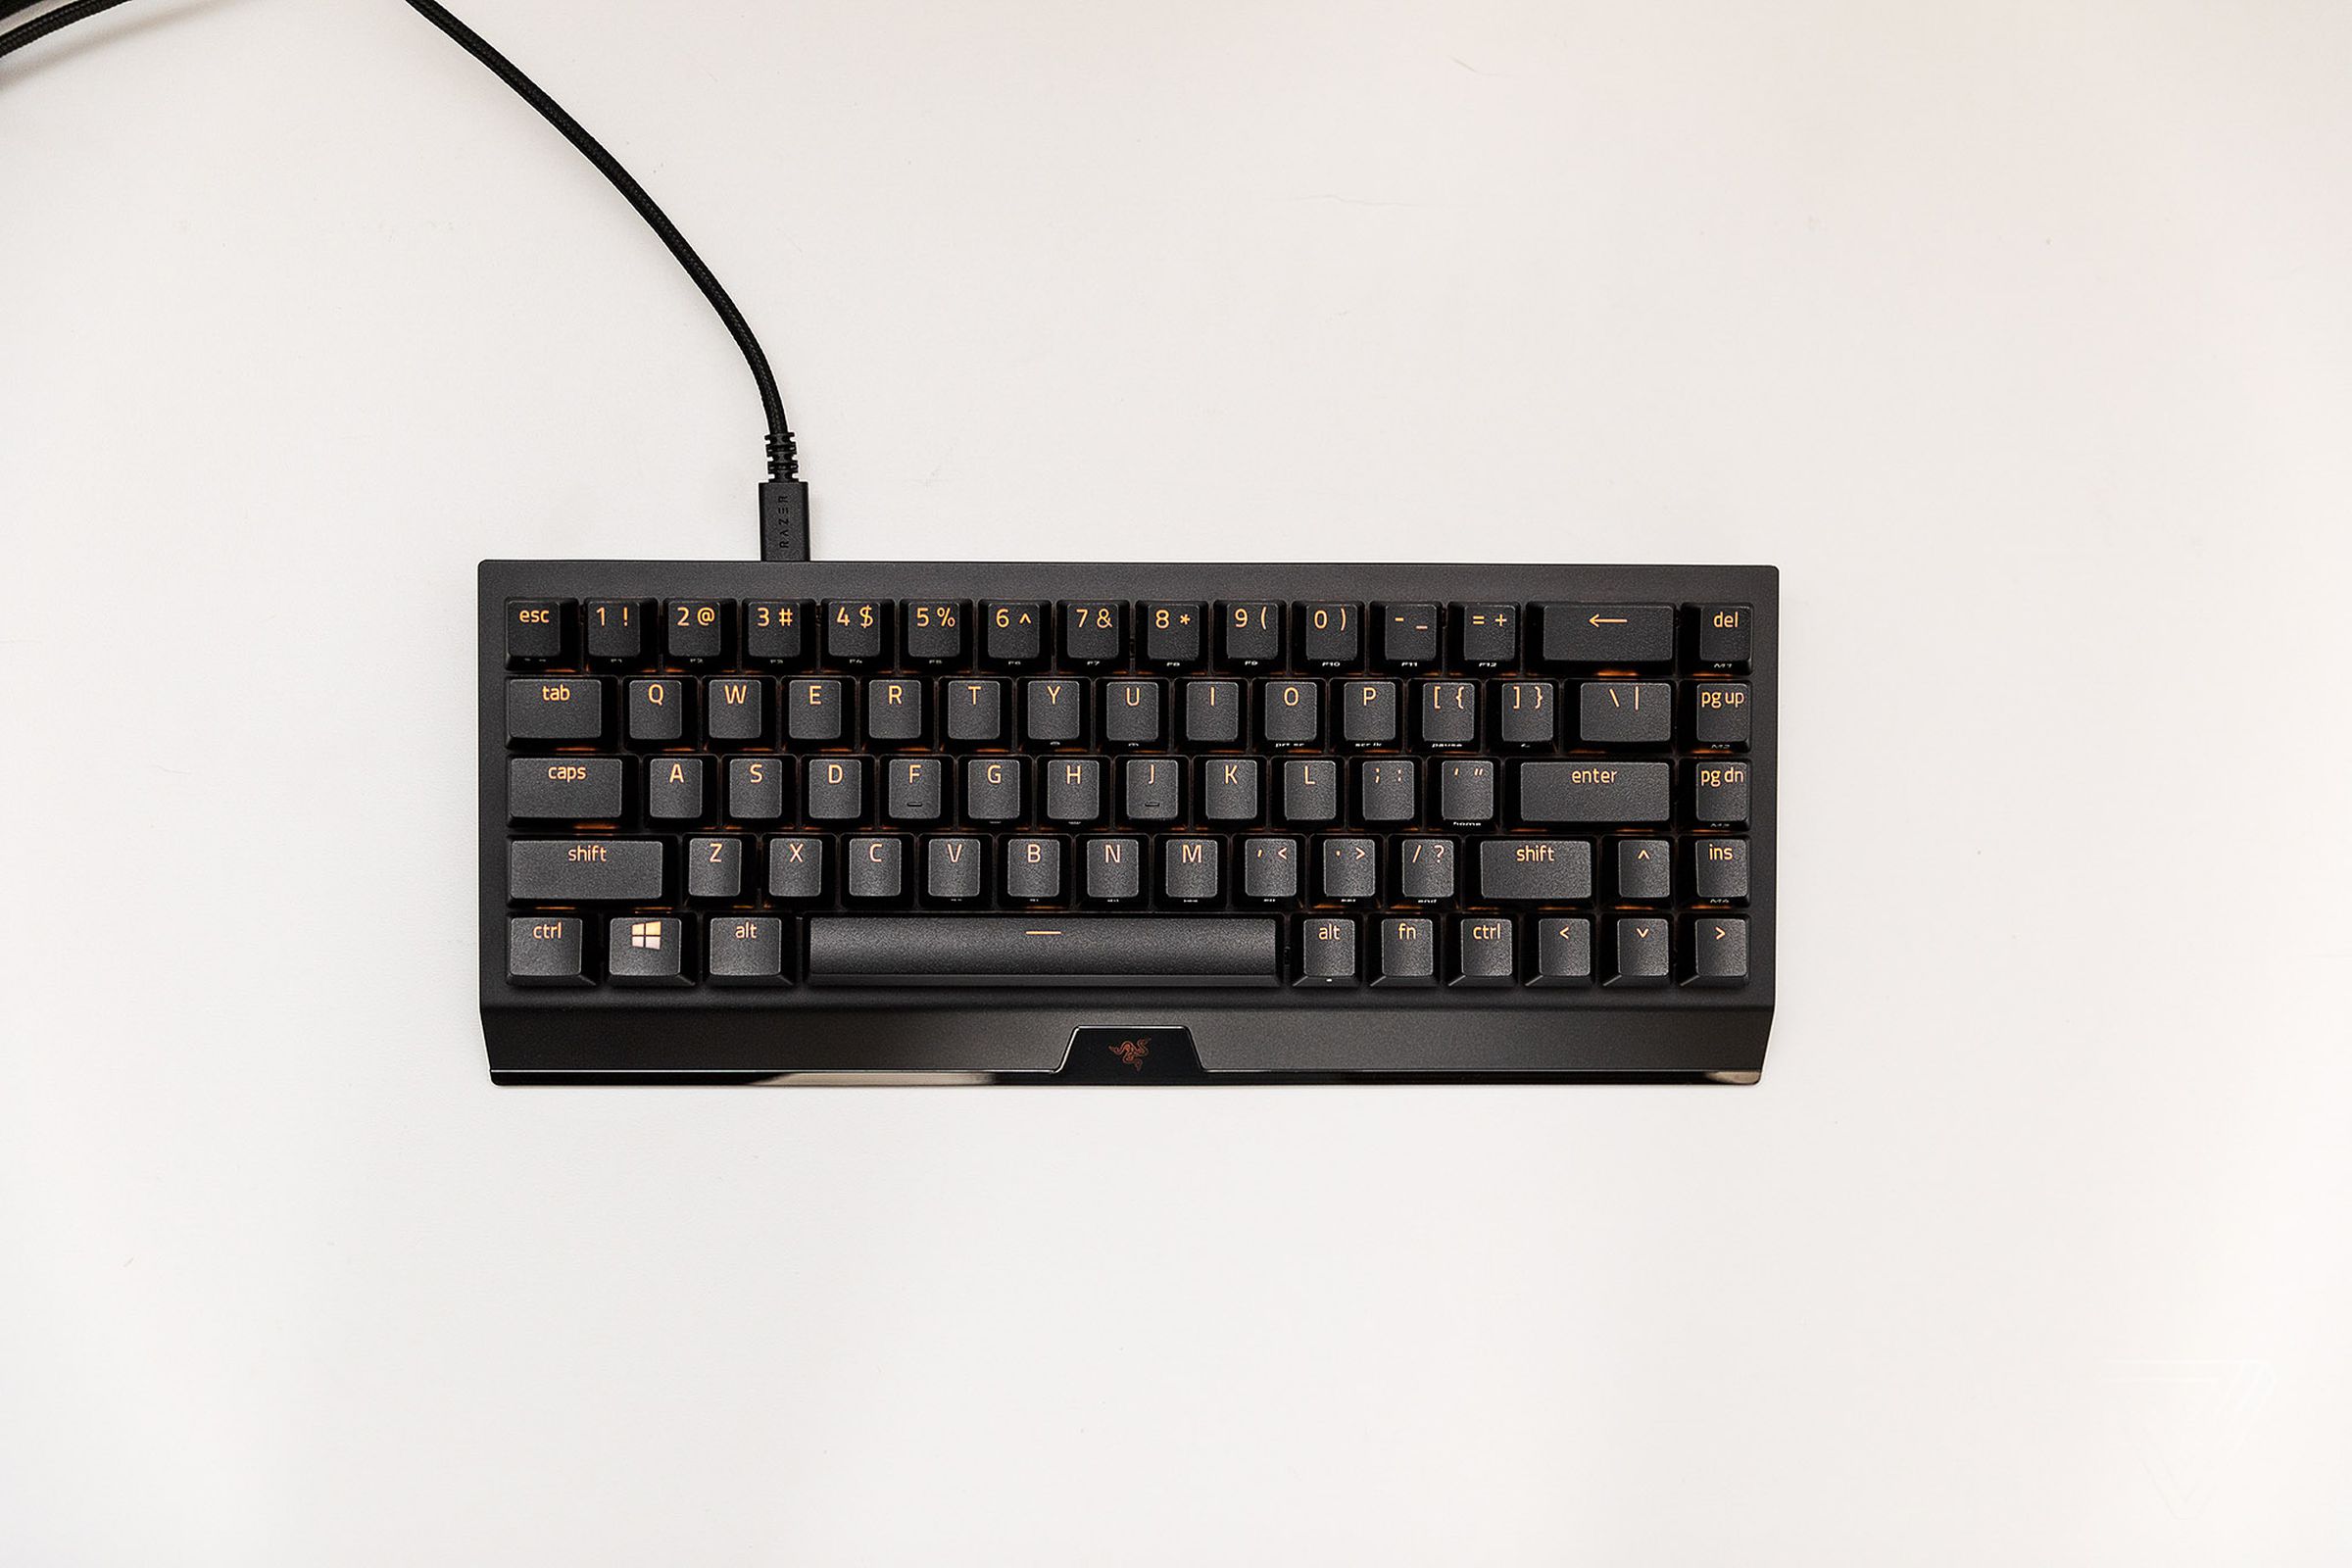 The 65 percent layout of the BlackWidow V3 mini retains the bare essentials without taking up too much space